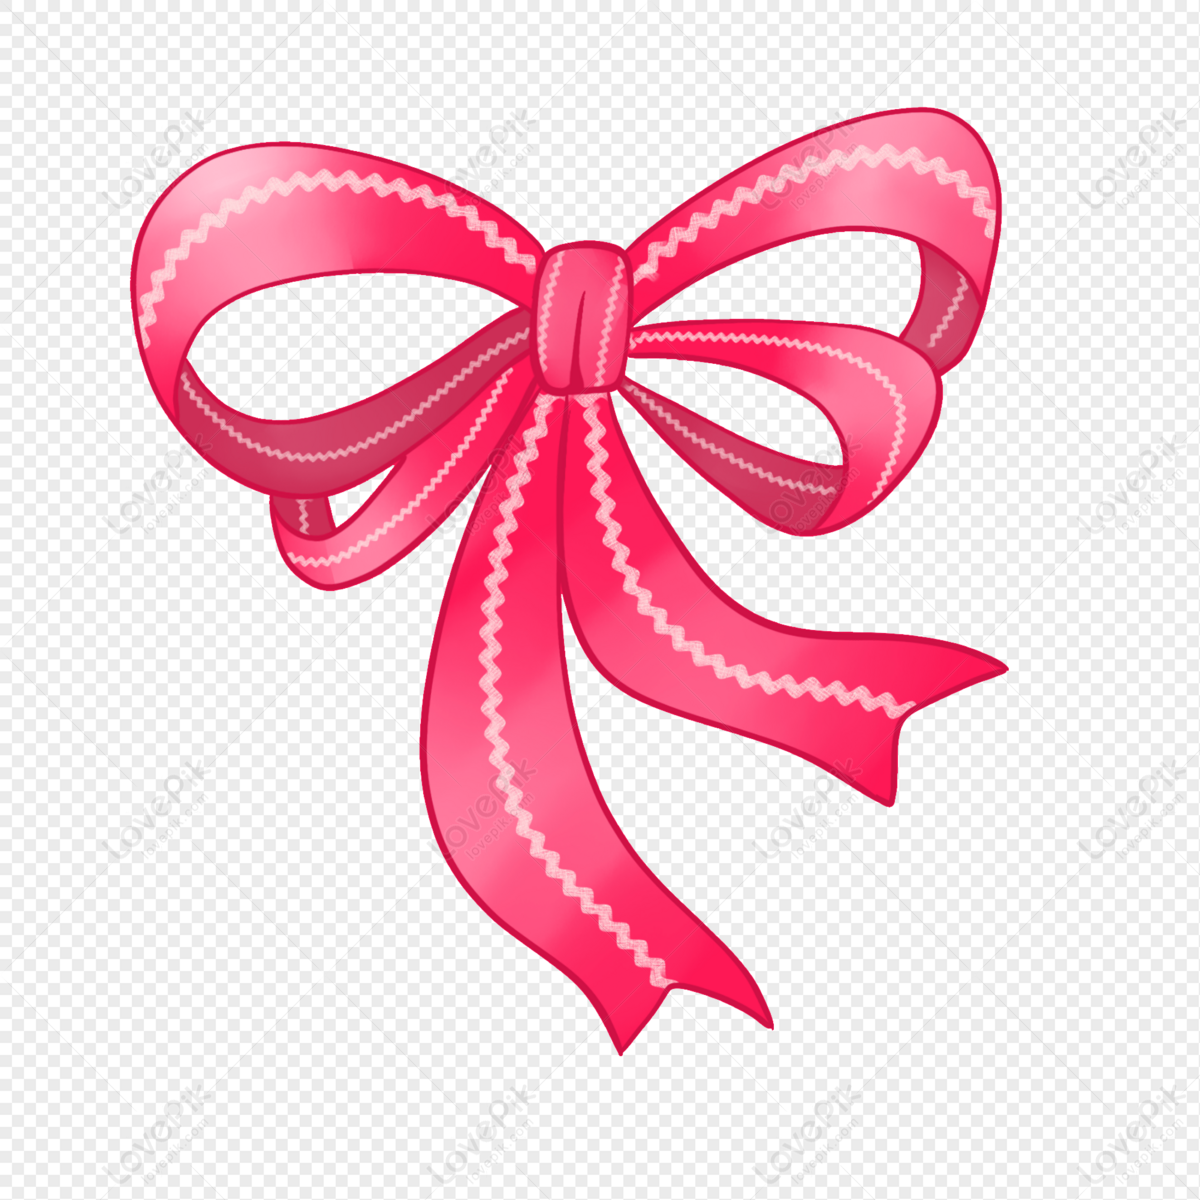 Big Red Festive Cute Lace Bow Vector Free Border PNG Images